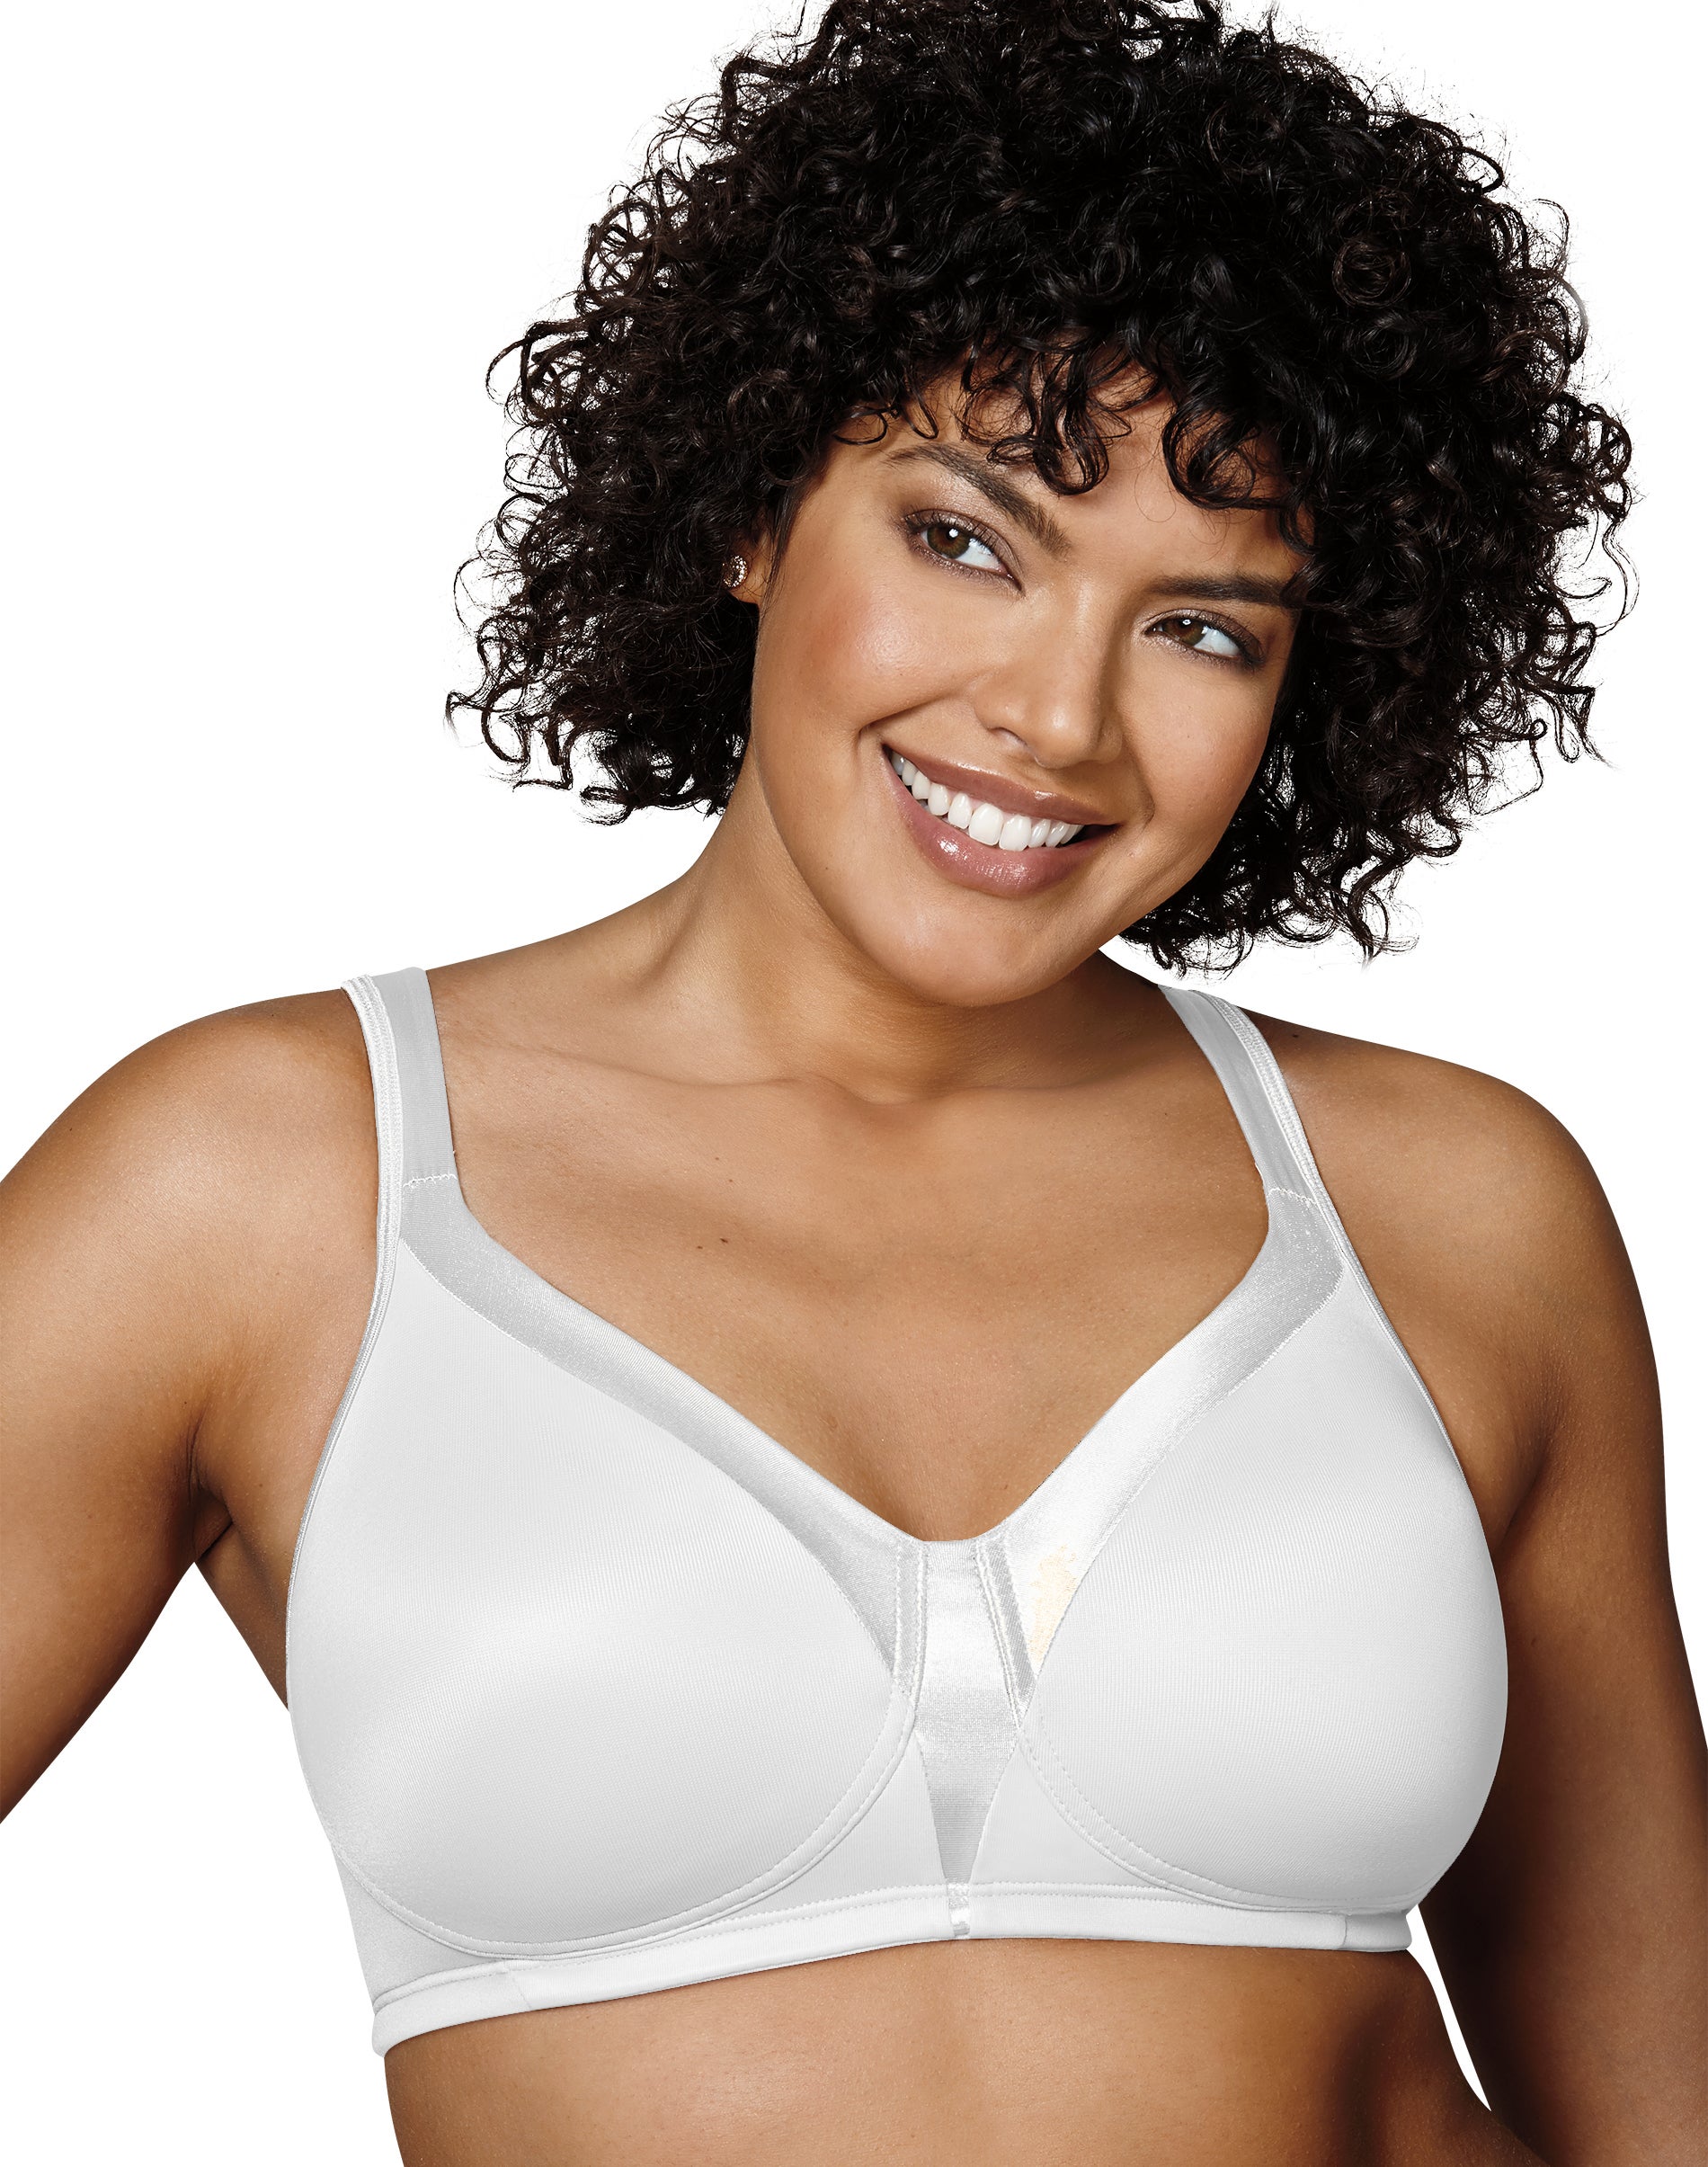 Womens 18 Hour Stylish Support Wirefree Bra, Style 4608 